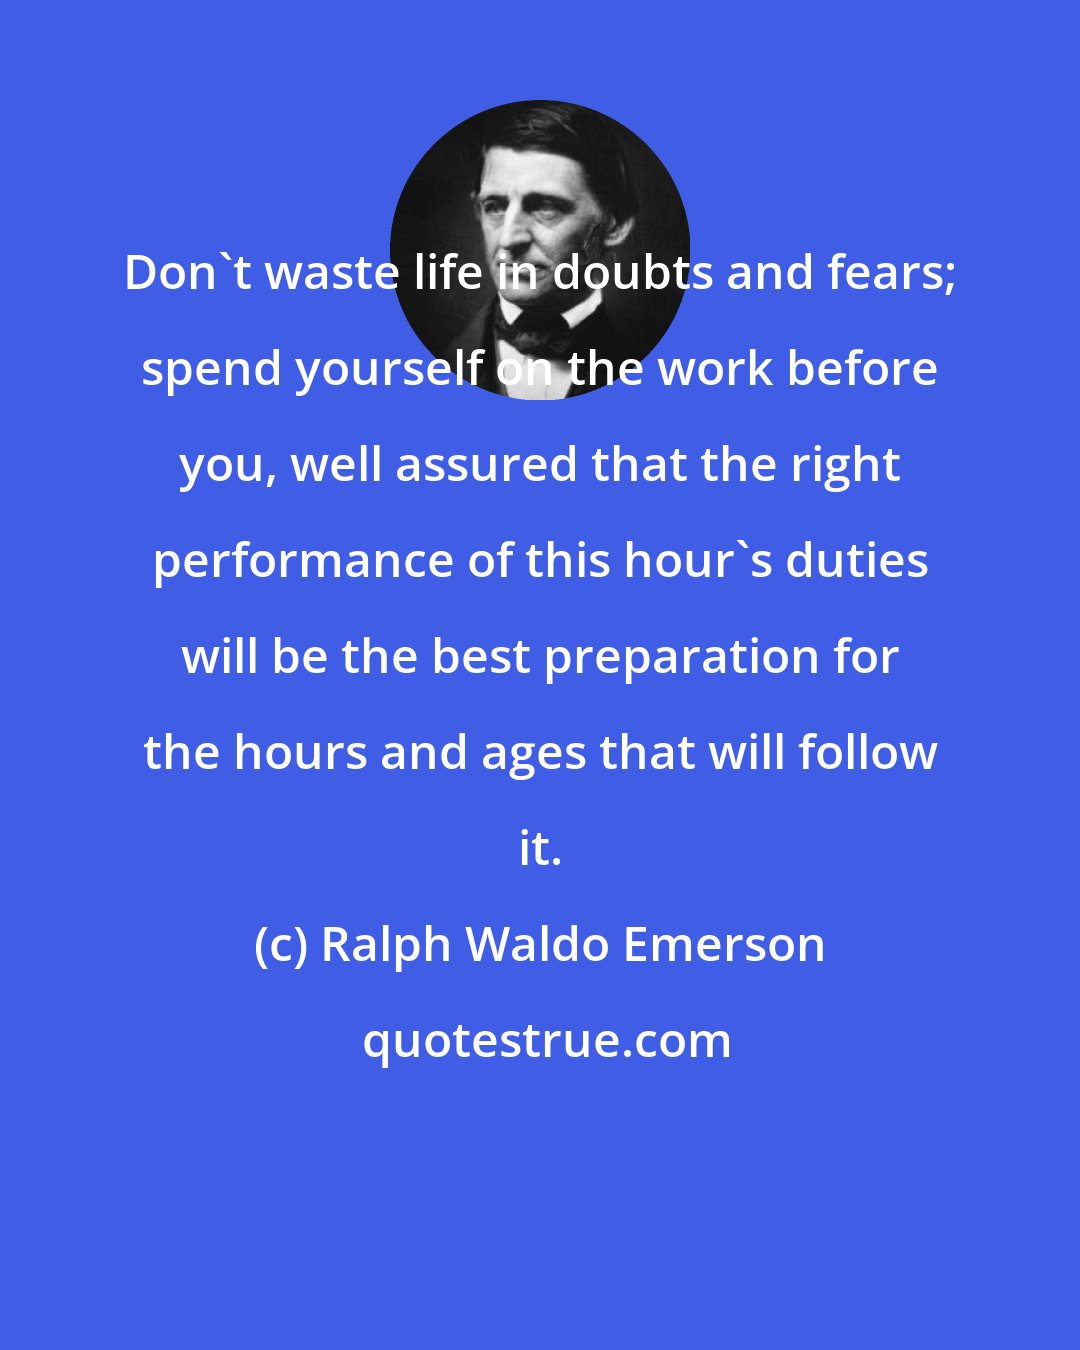 Ralph Waldo Emerson: Don't waste life in doubts and fears; spend yourself on the work before you, well assured that the right performance of this hour's duties will be the best preparation for the hours and ages that will follow it.